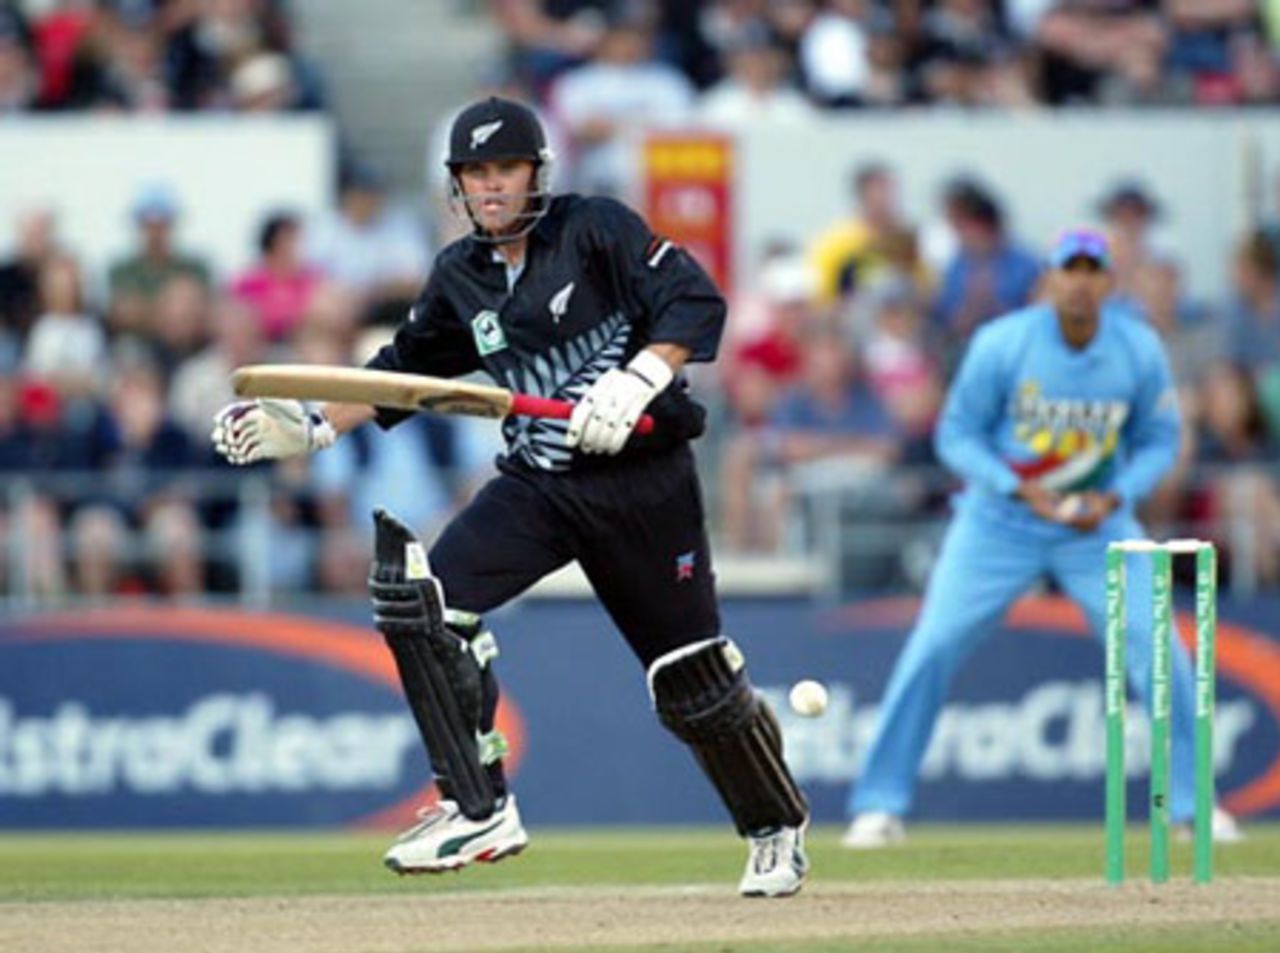 New Zealand batsman Lou Vincent sets off for a quick single after playing a delivery to the leg side during his innings of 15. 3rd ODI: New Zealand v India at Jade Stadium, Christchurch, 1 January 2003.